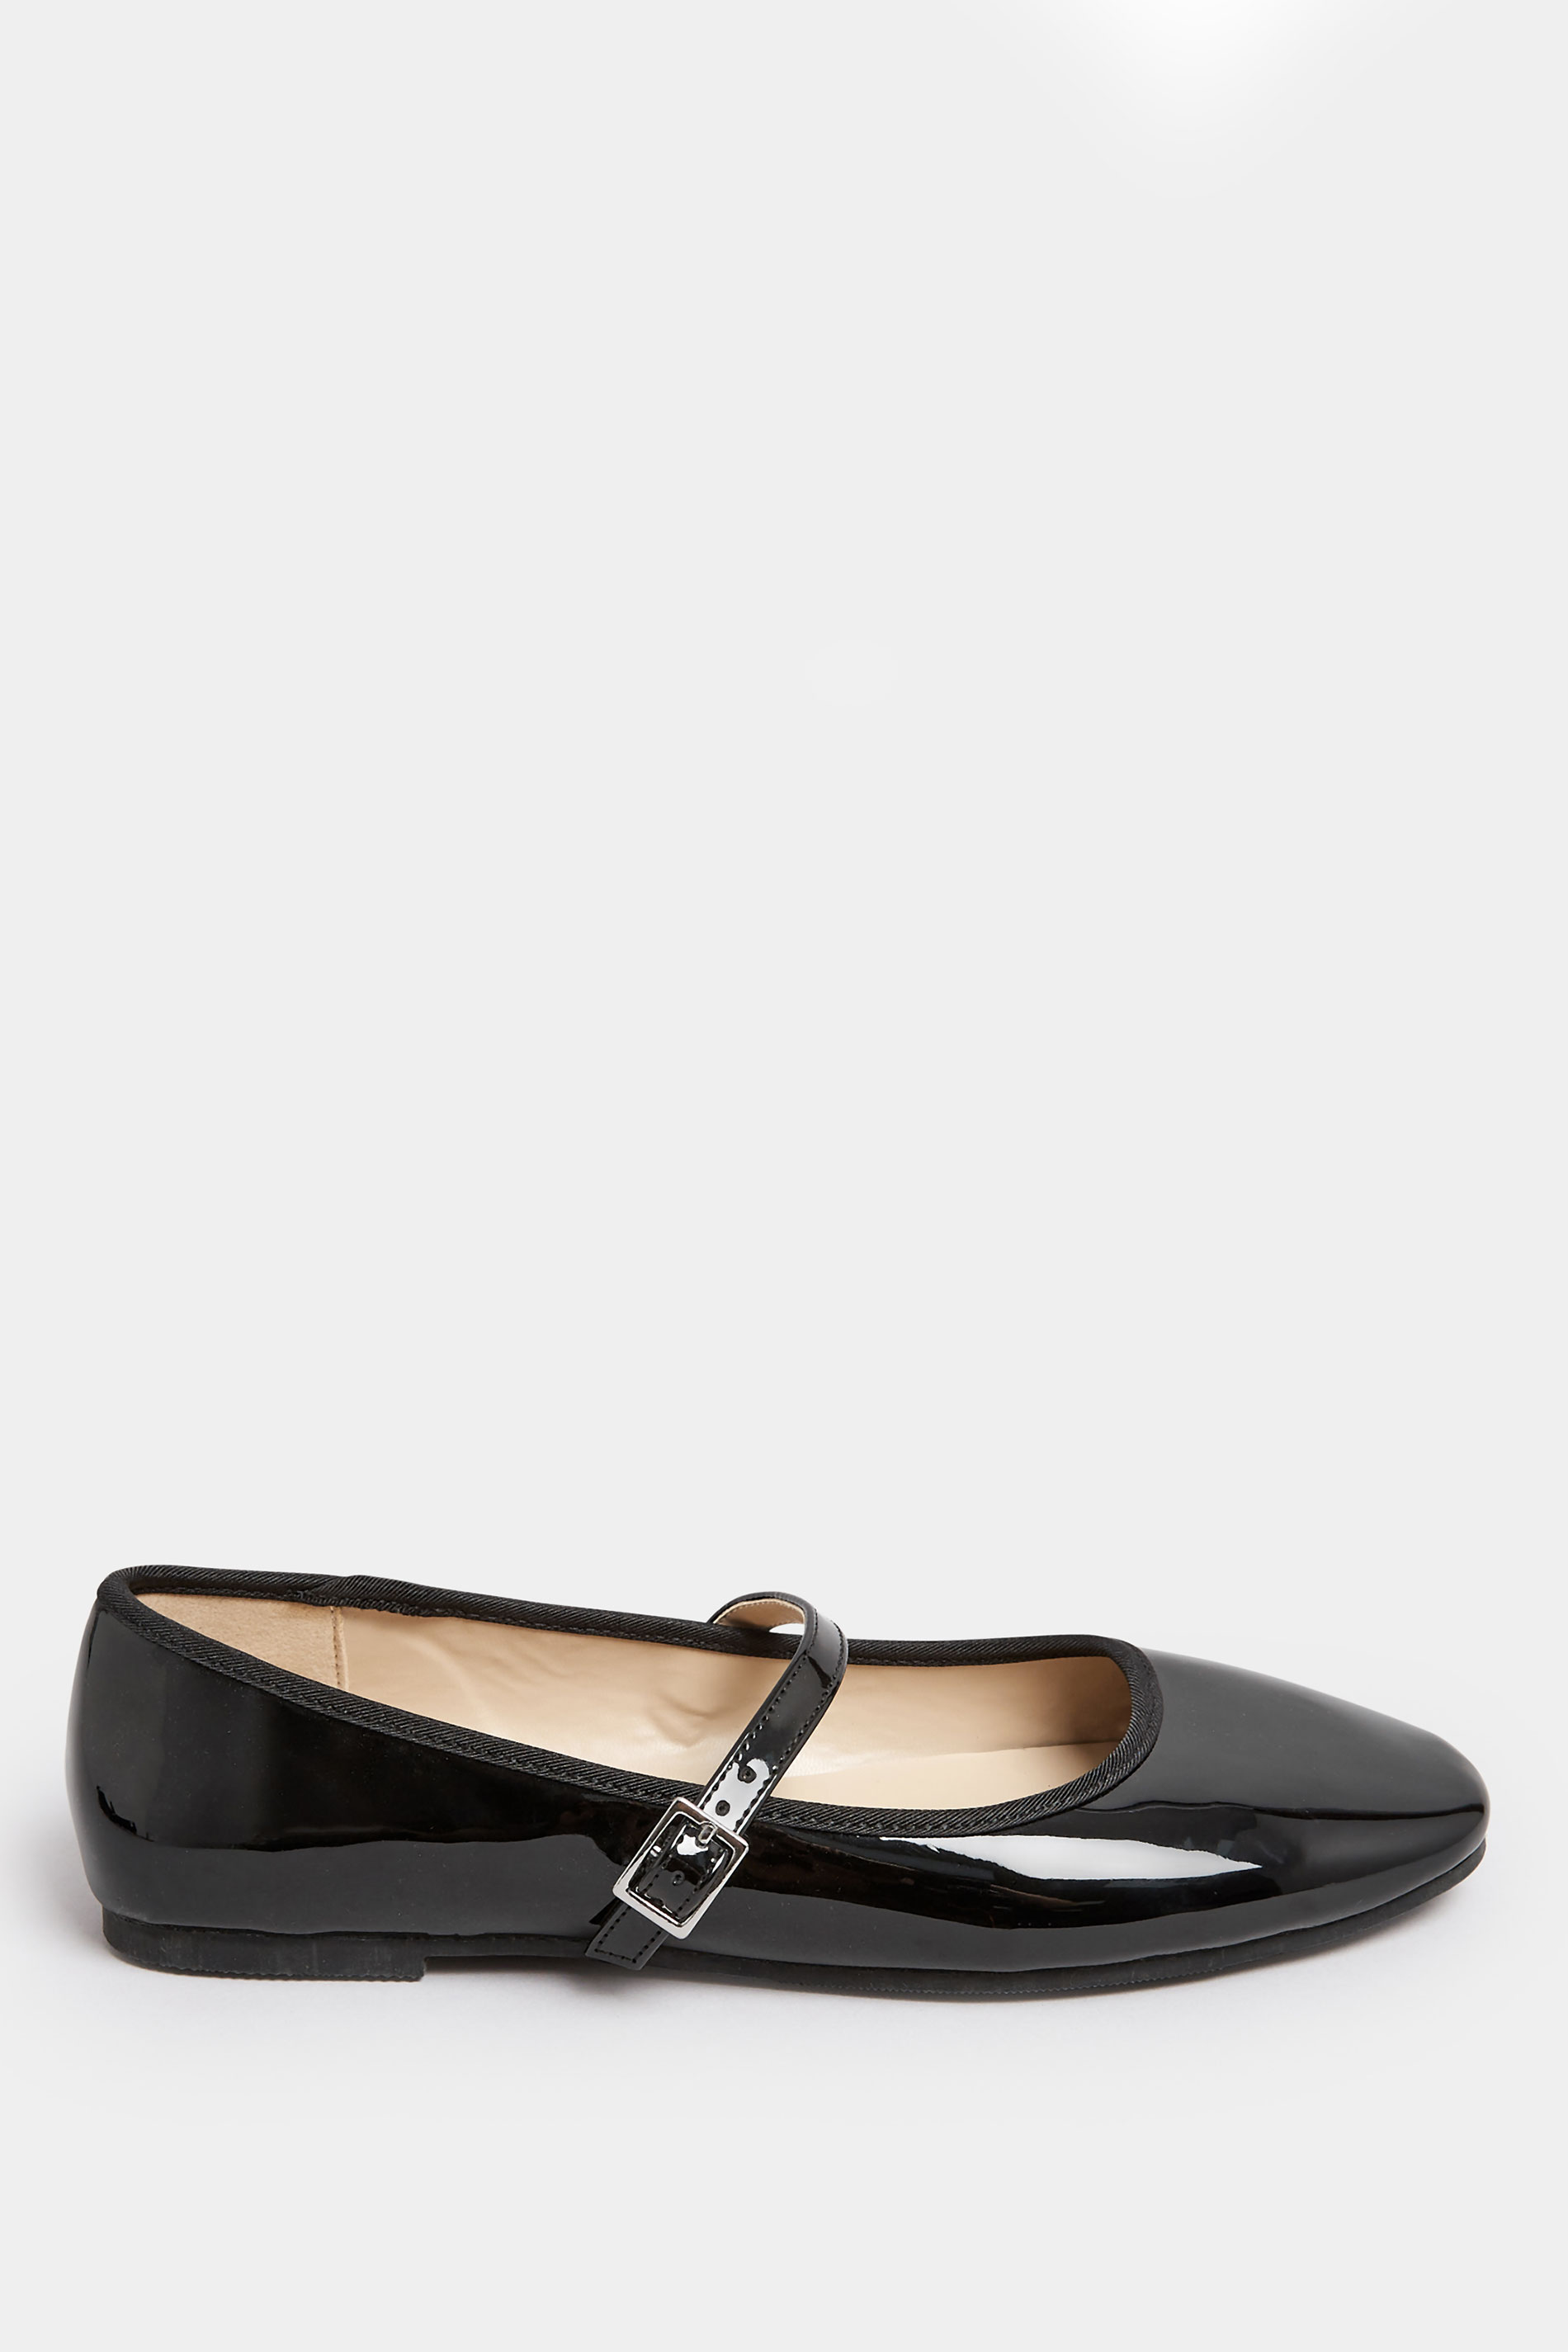 Black Patent Mary Jane Ballerina Pumps In Wide E Fit & Extra Wide EEE Fit | Yours Clothing  3